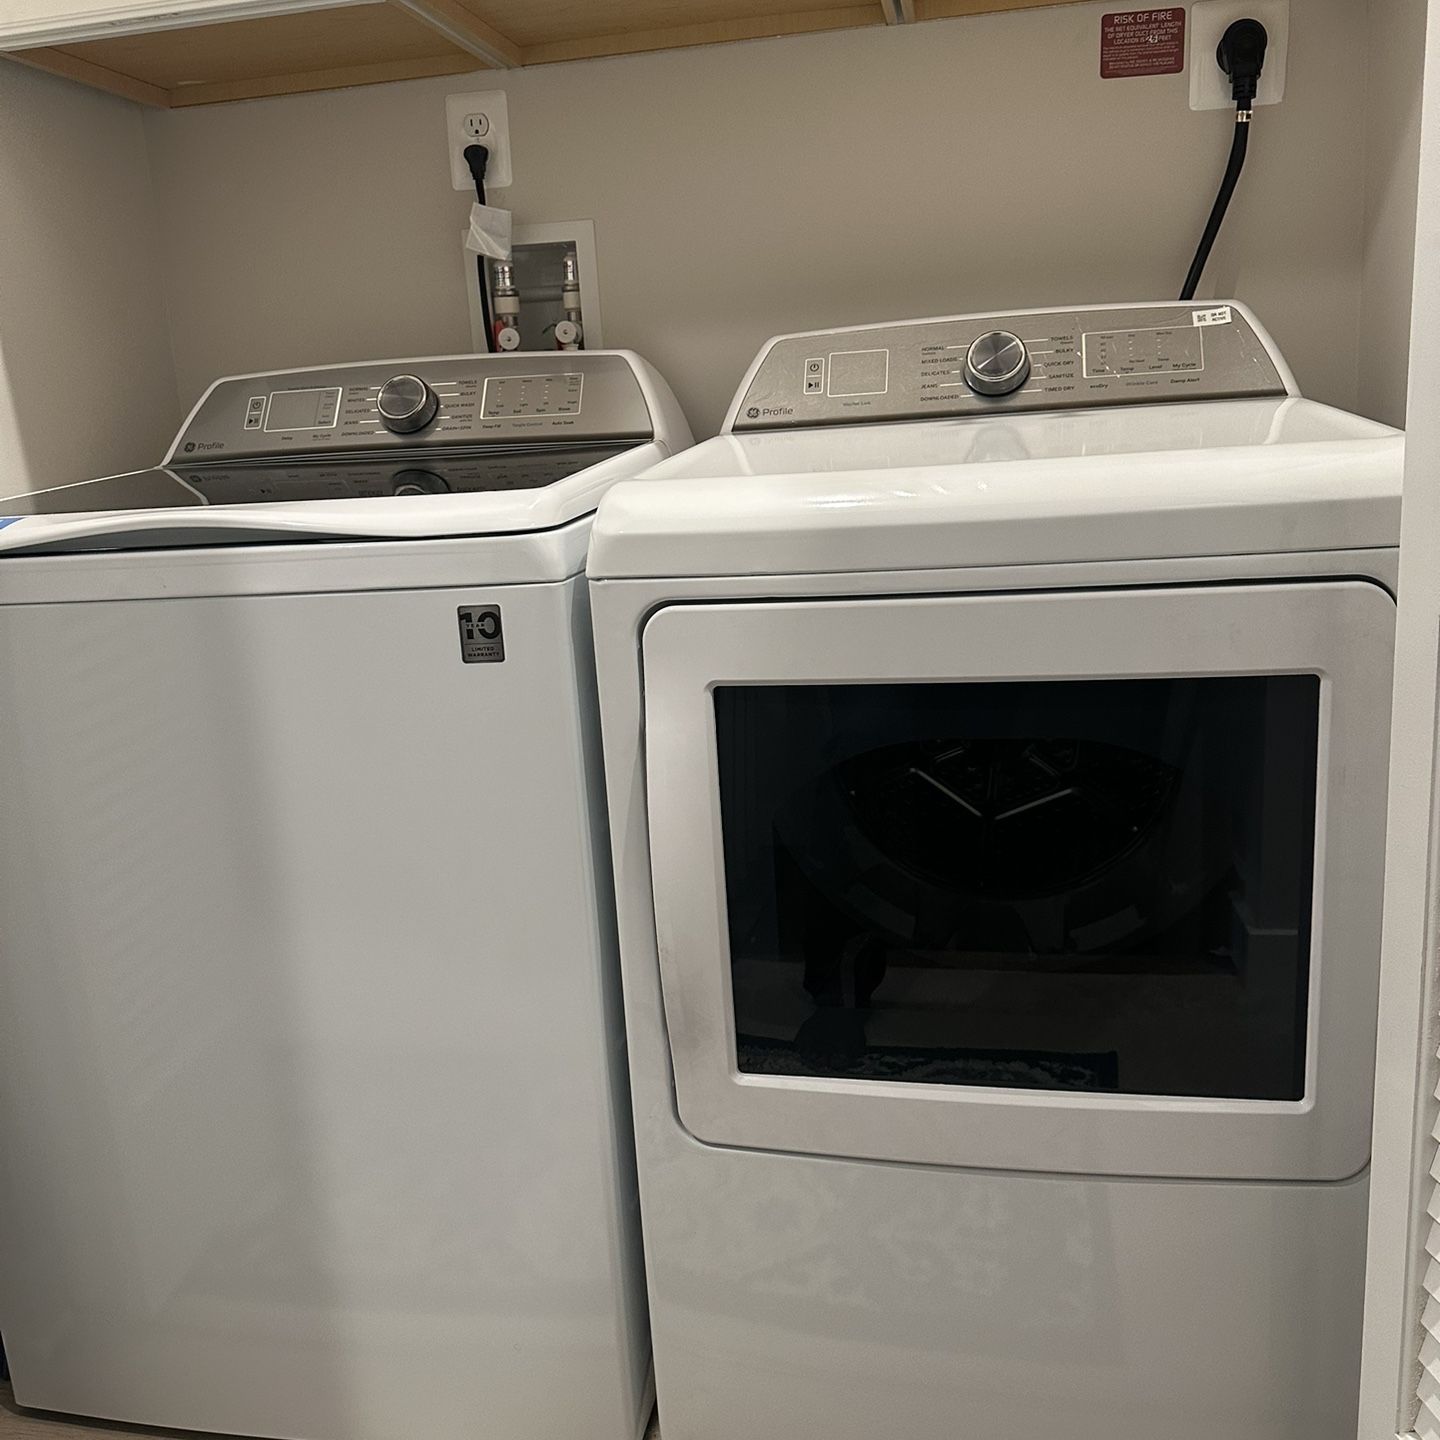 GE Dryer and Washer. They are Less Than a Year Old